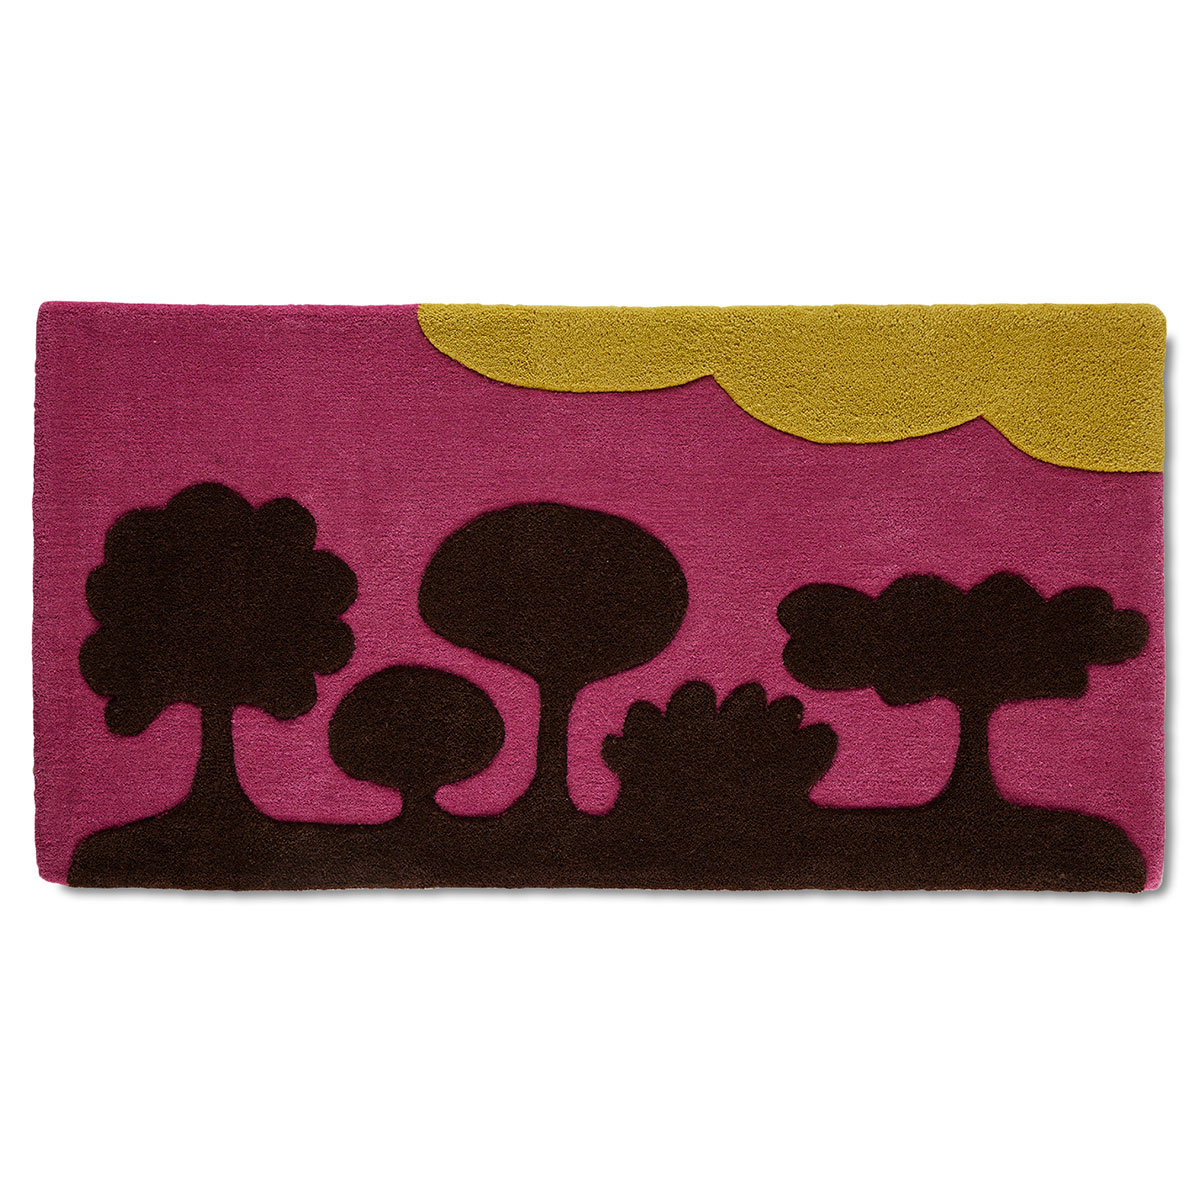 A pink and yellow rug with a scene of abstract trees on it called Island Family Sunset.